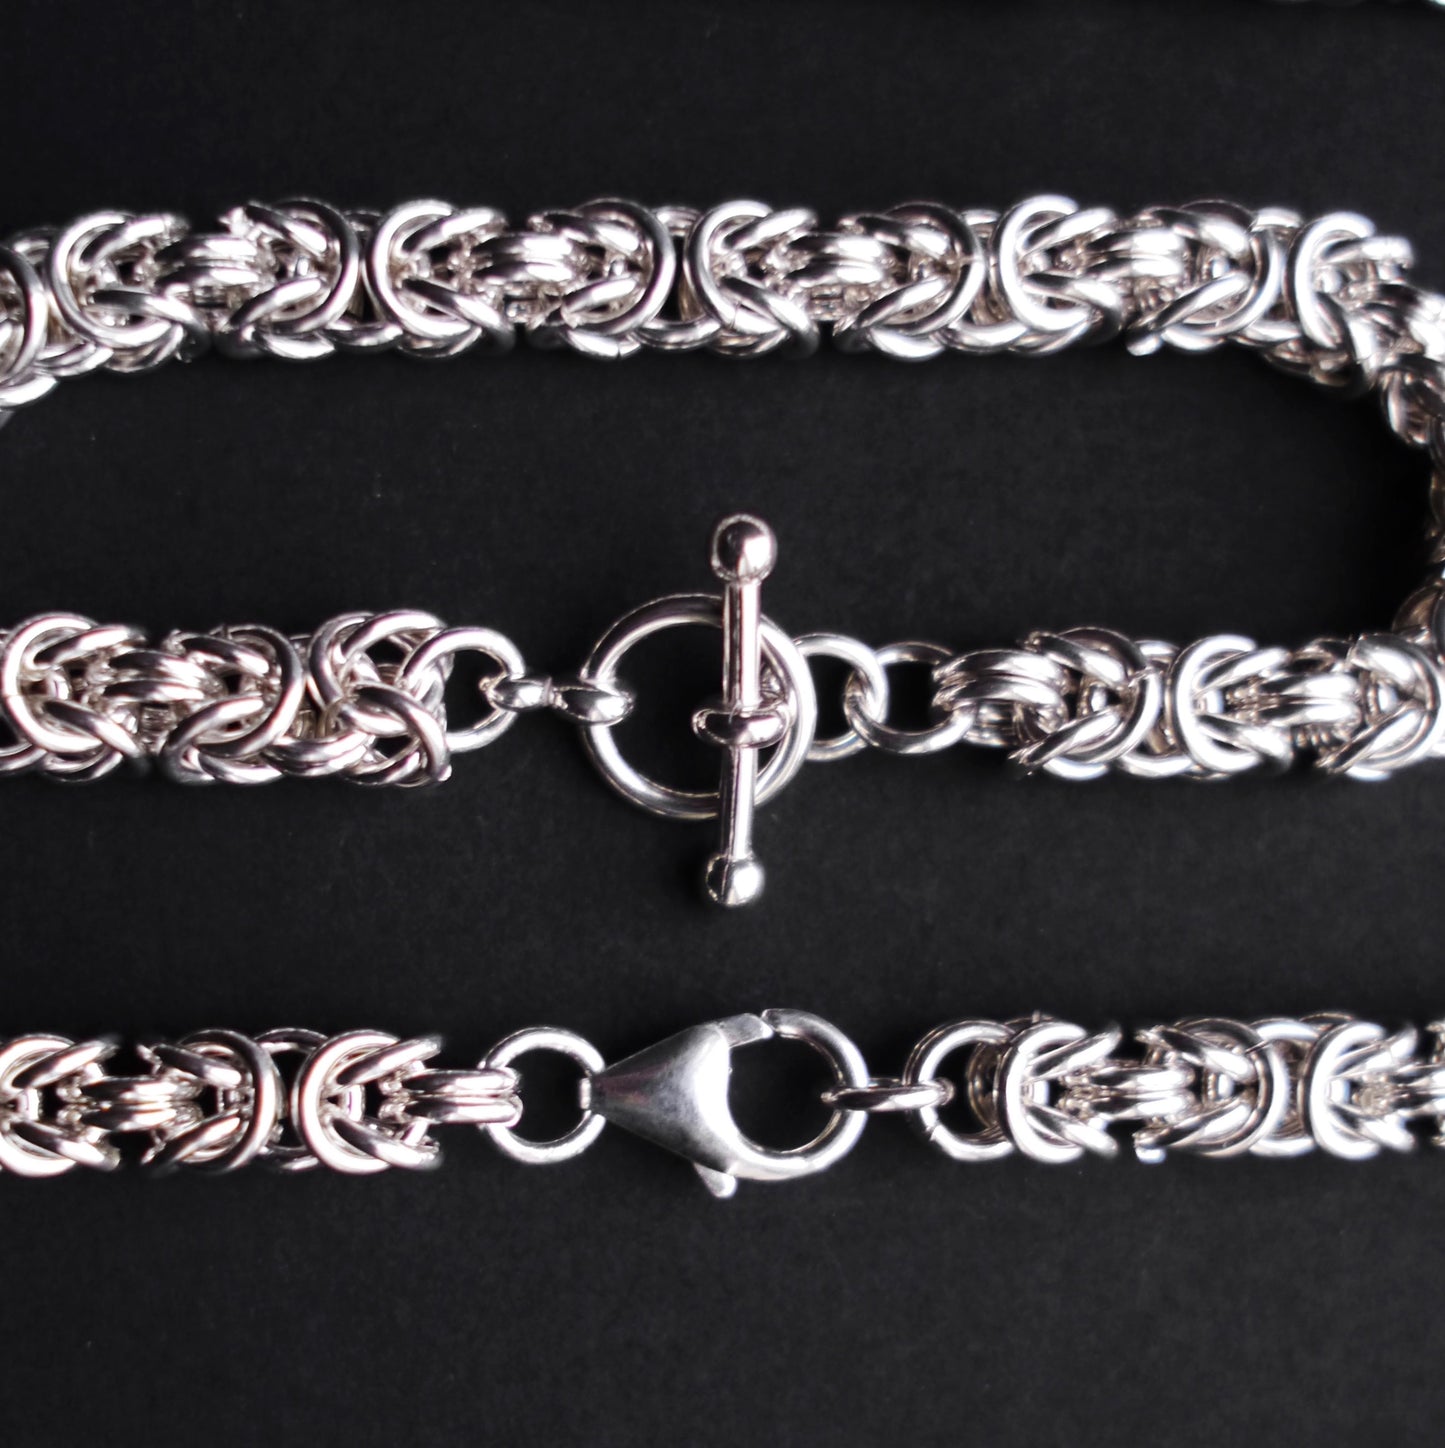 6mm Byzantine Chainmaille Bracelet in Sterling Silver